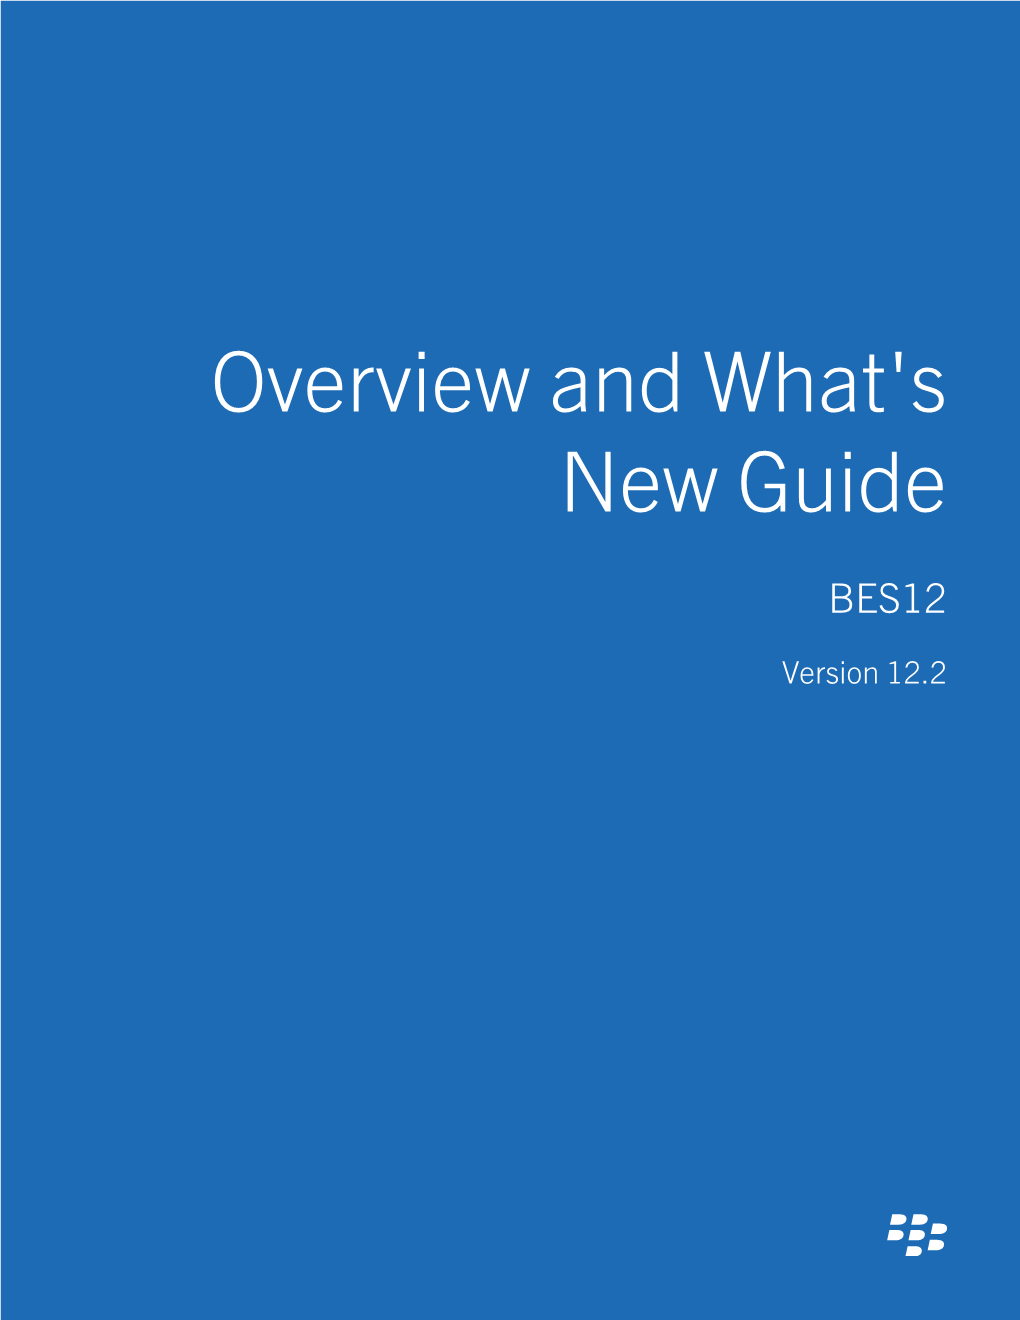 BES12-Overview and What's New Guide